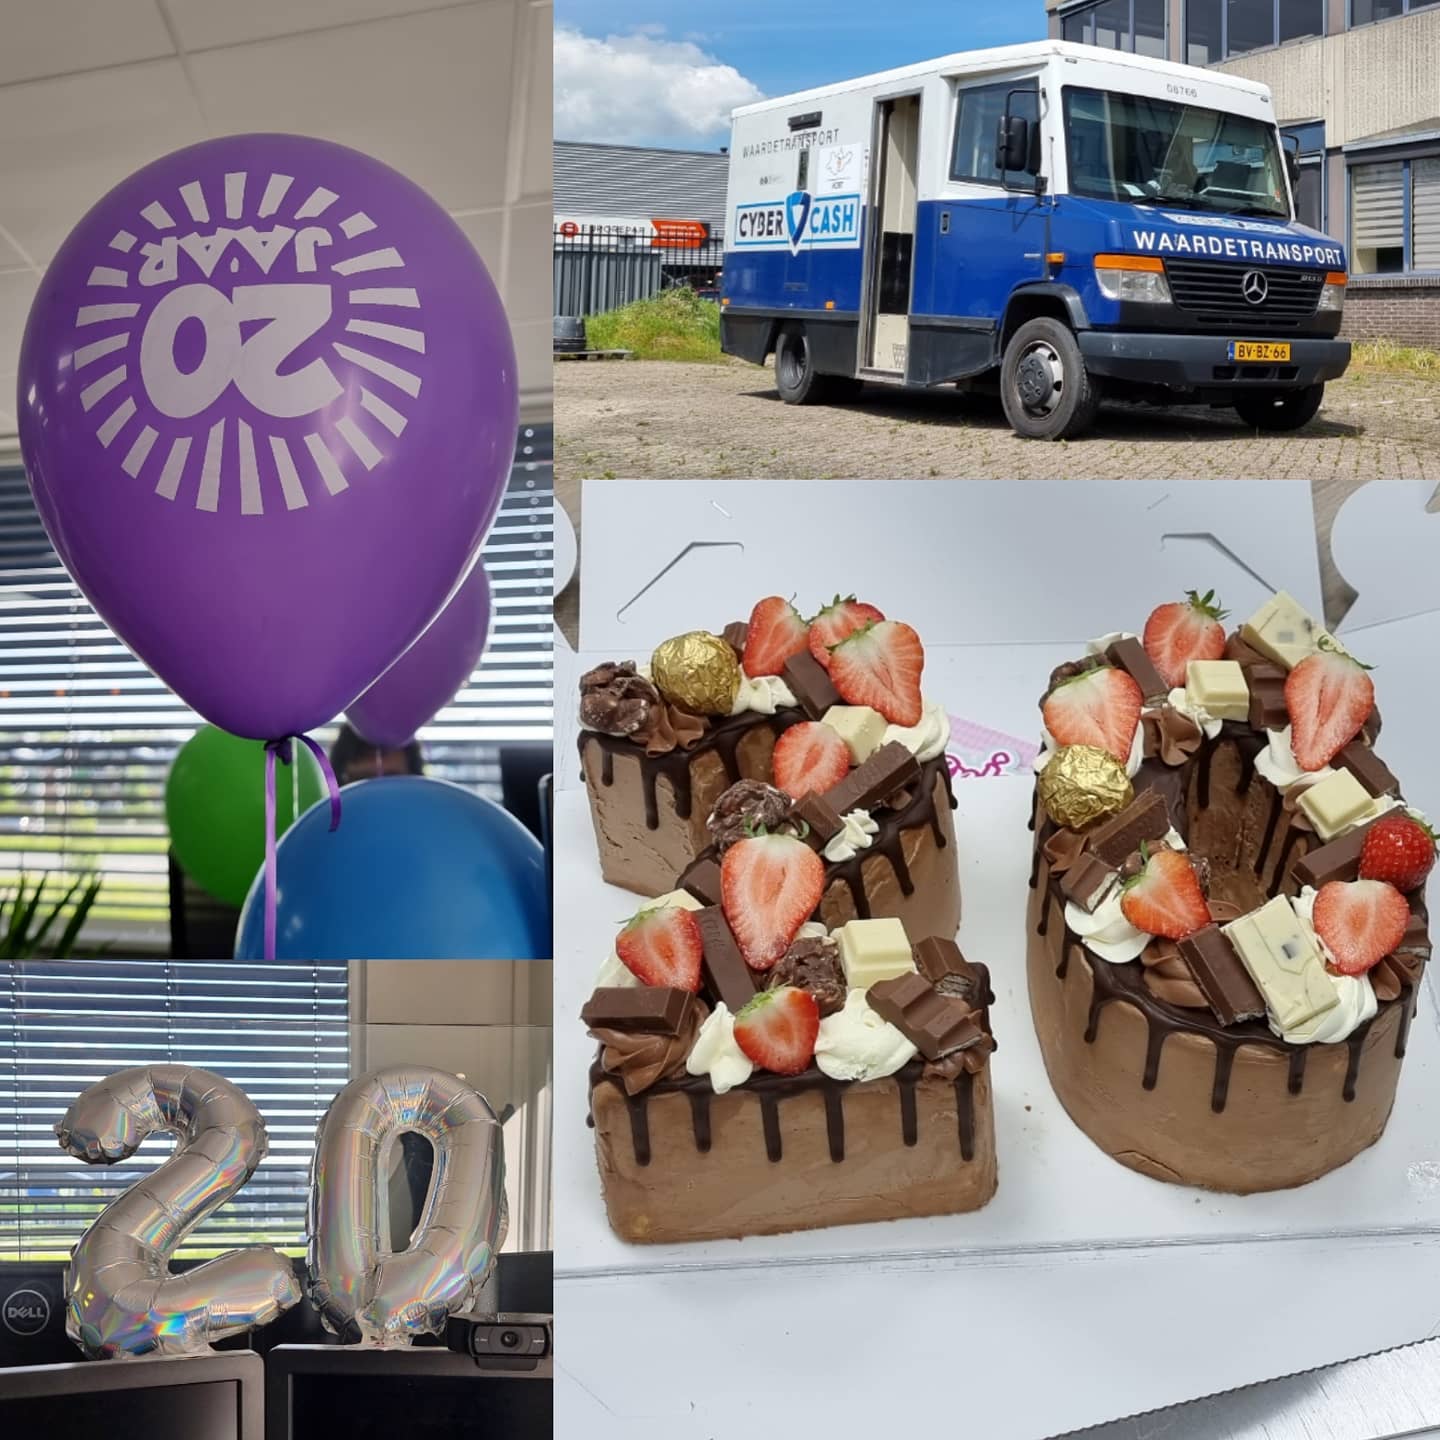 Today was our 20 year celebration at work,  lots of cake and a mobile escape room..Also I work there 20 years now